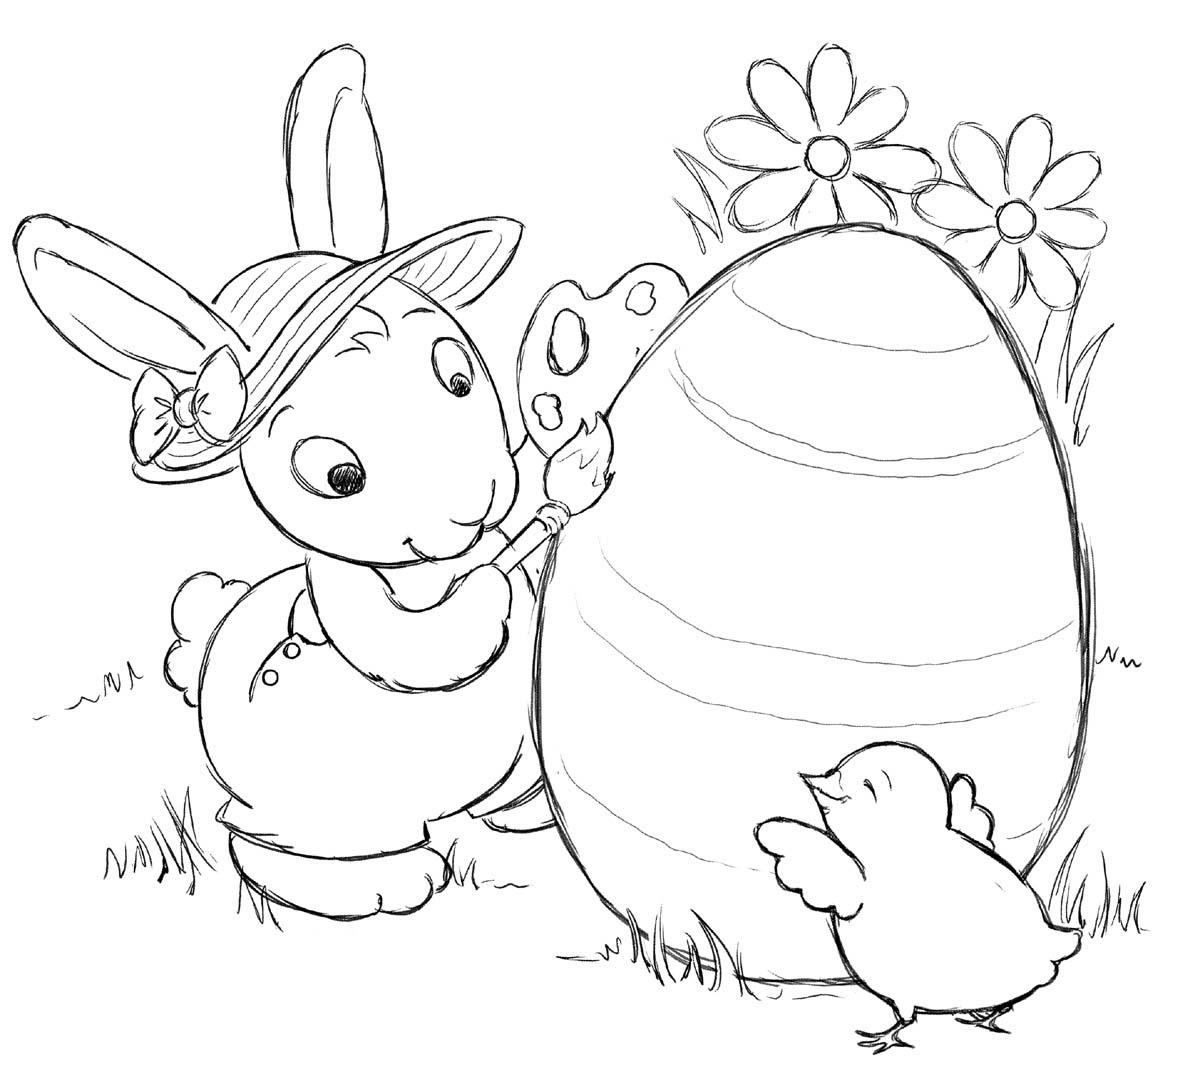 Printable coloring pages rabbit >> Disney Coloring Pages